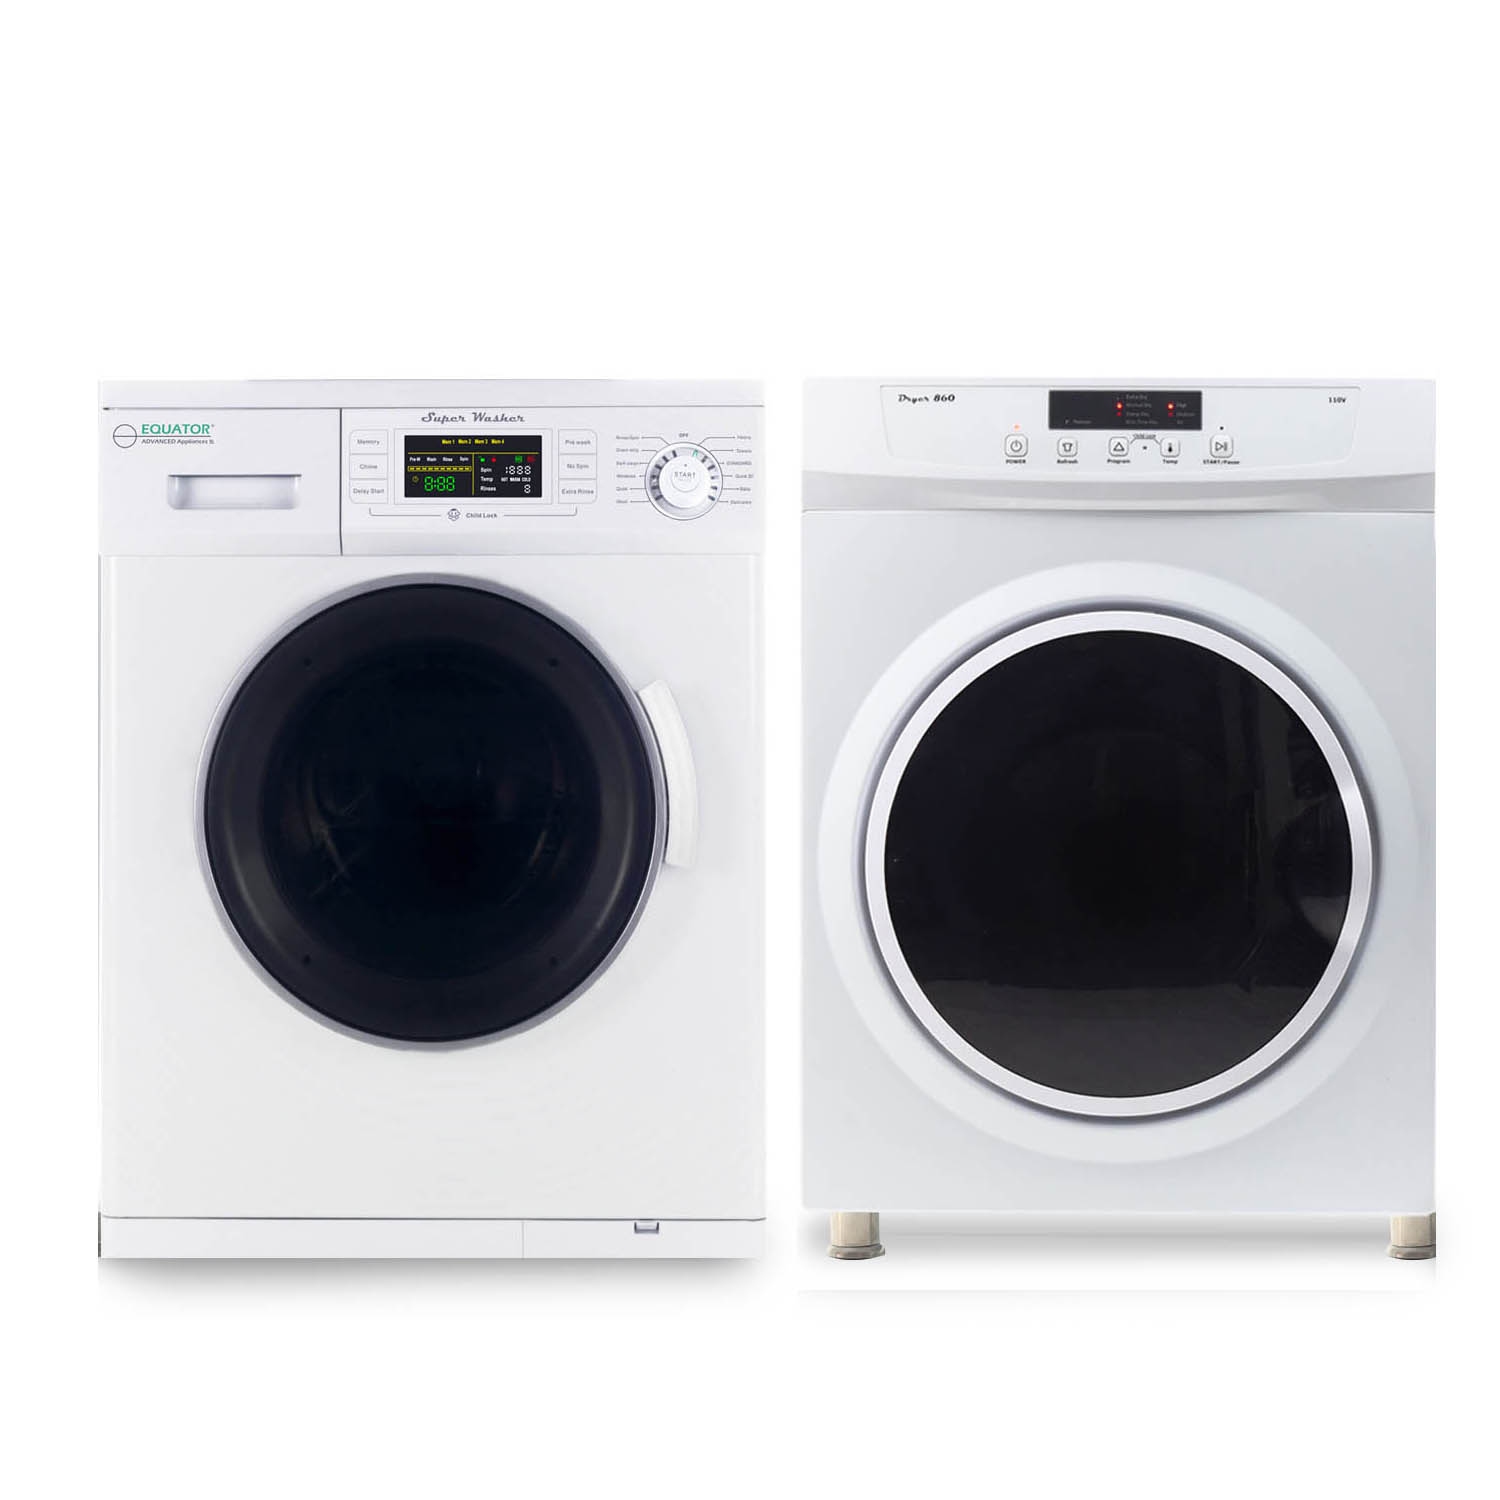 Equator Pro3 Compact 110V Set Washer 13lbs+Dryer Vented 3.5cu.ft Sensor/Refresh (EW 824 & ED 860 - Free Stacking Kit Included)